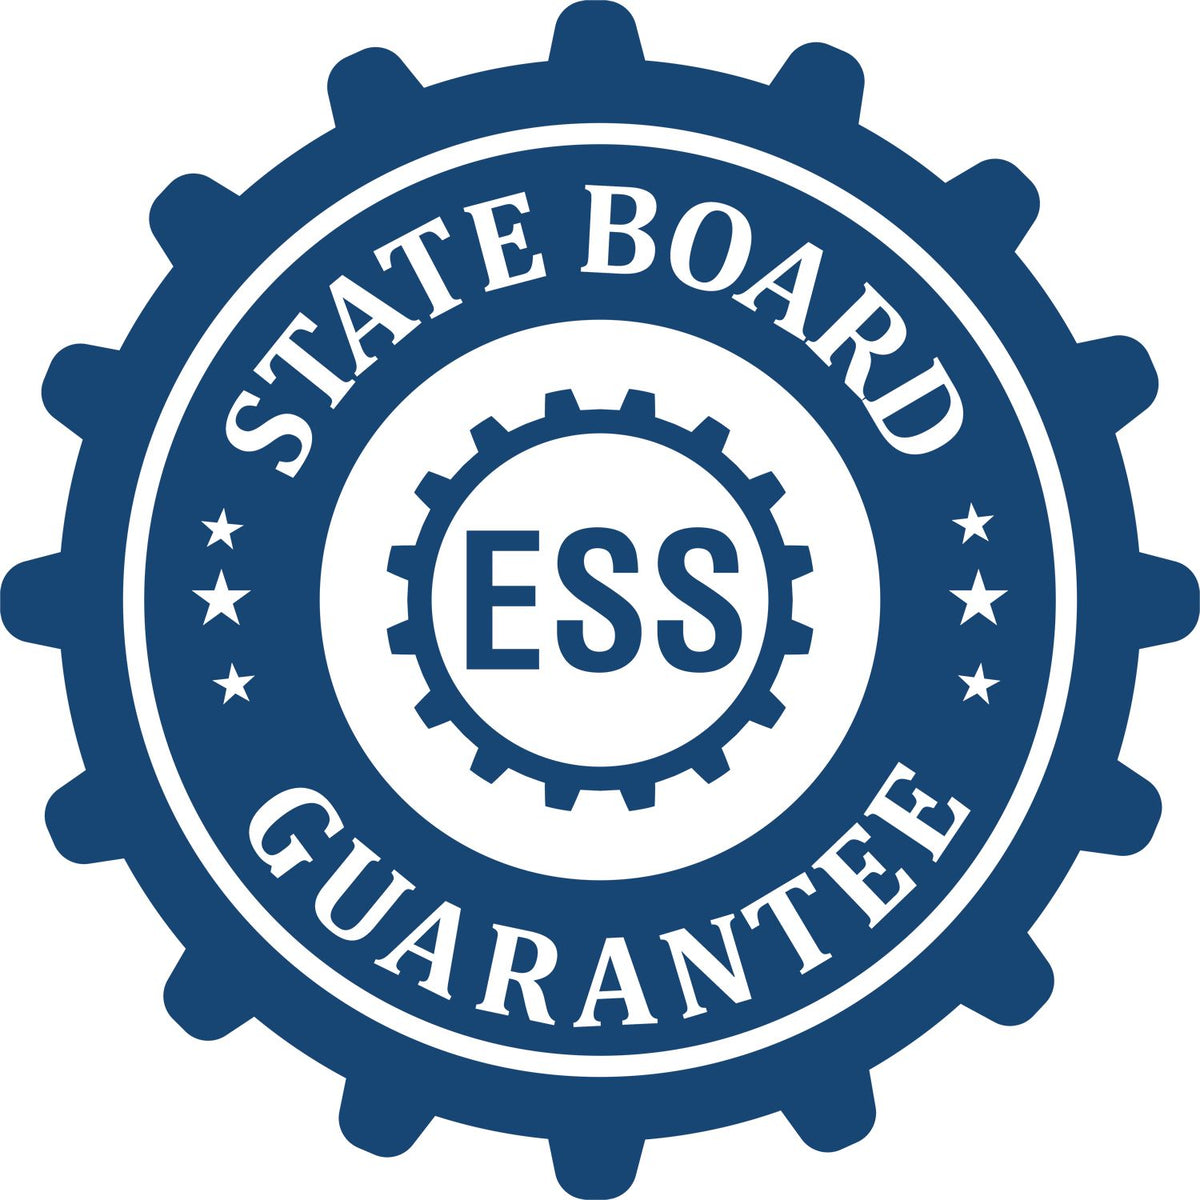 An emblem in a gear shape illustrating a state board guarantee for the State of Arkansas Soft Land Surveyor Embossing Seal product.